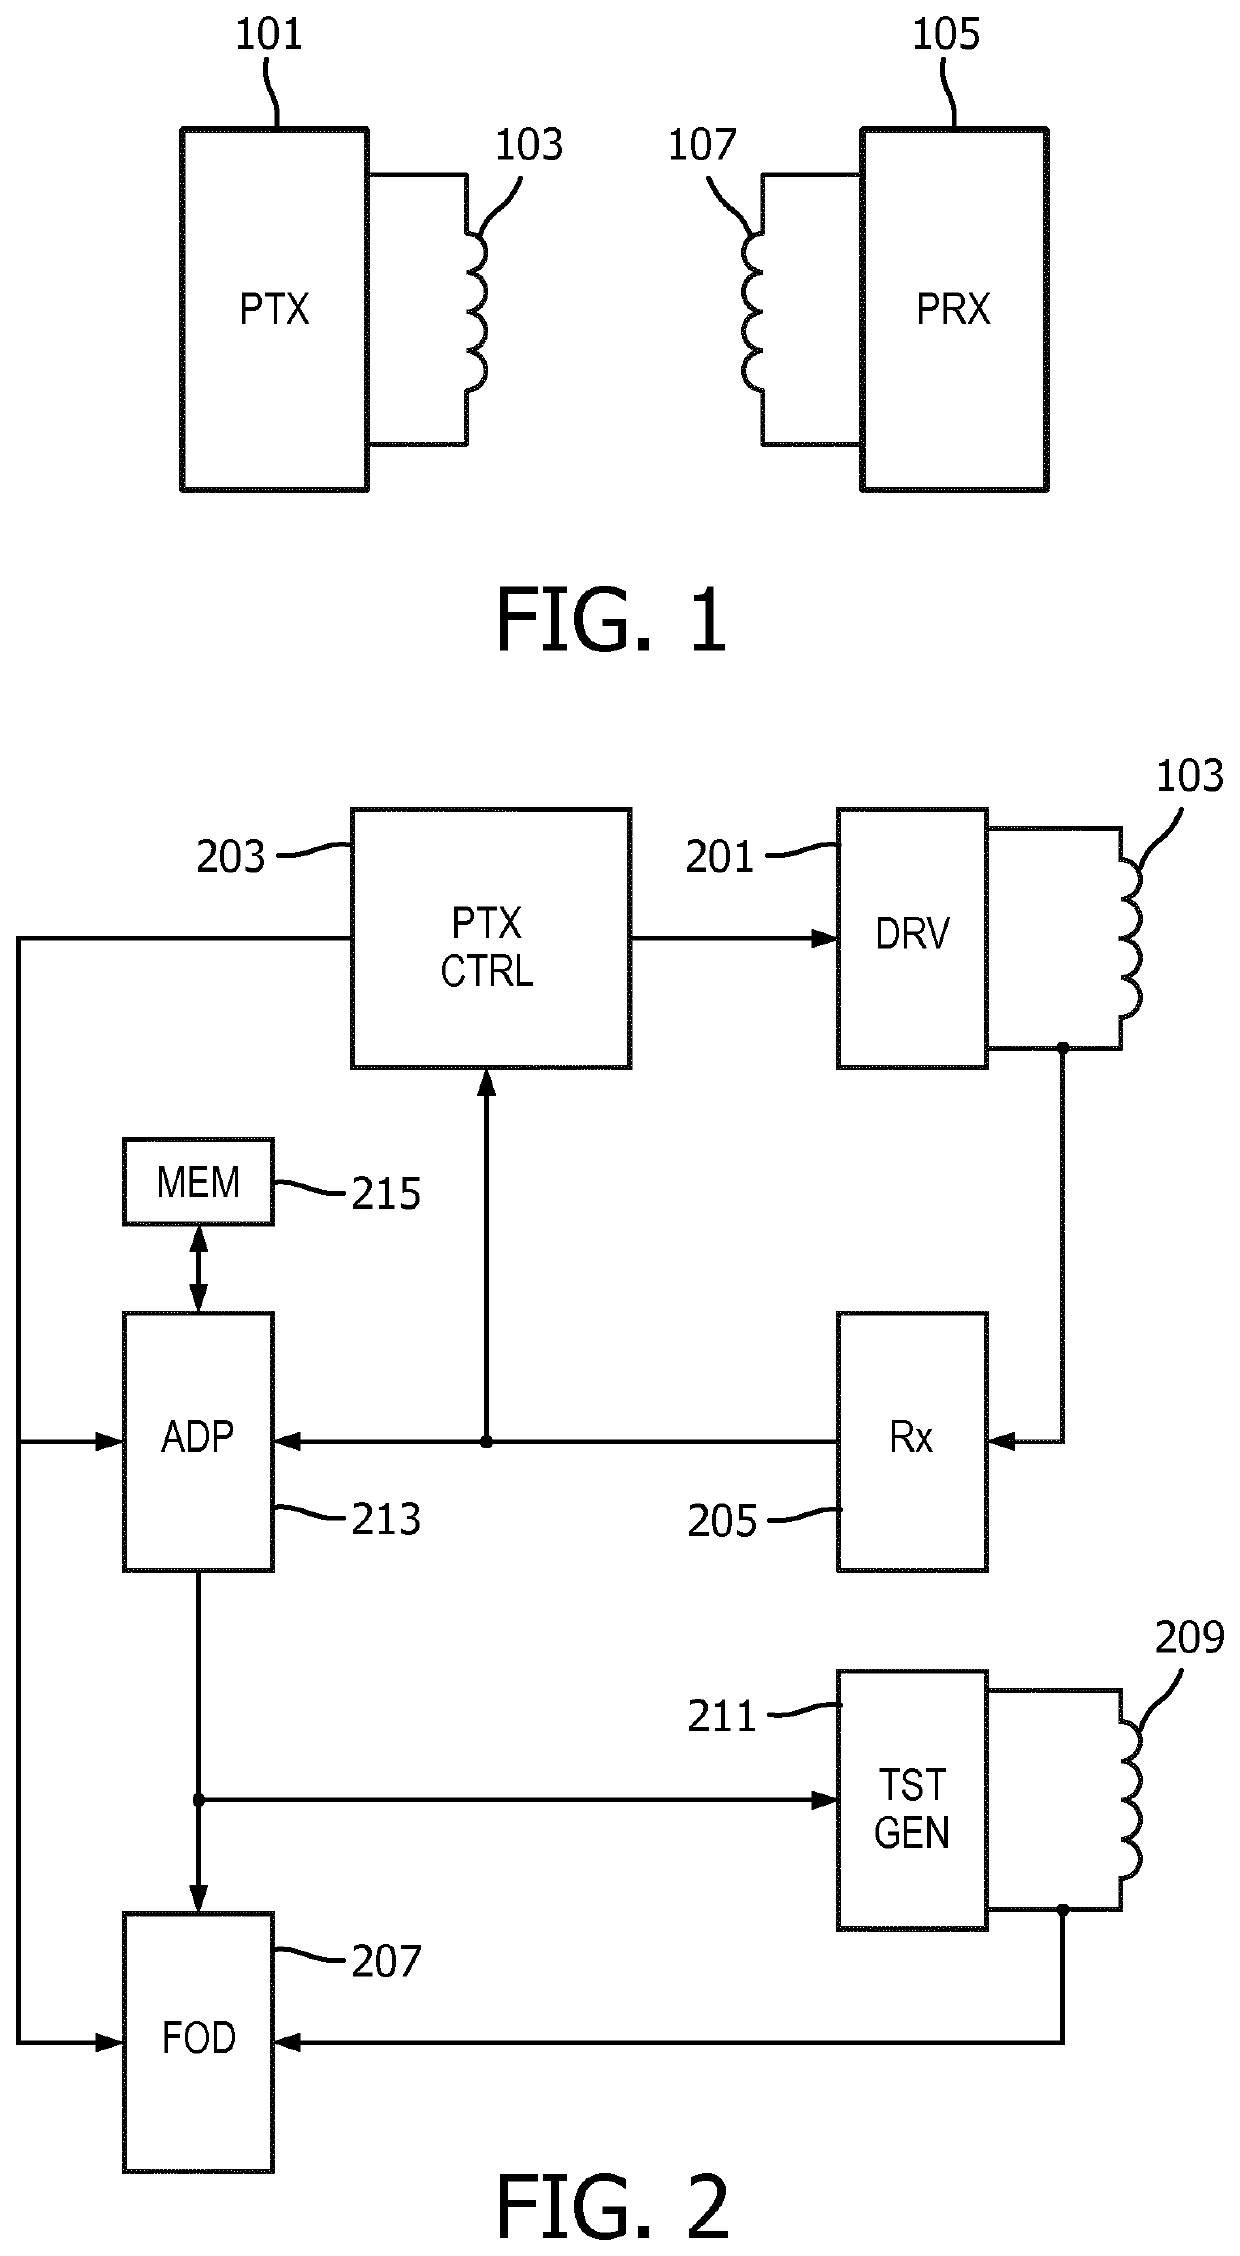 Foreign object detection in a wireless power transfer system